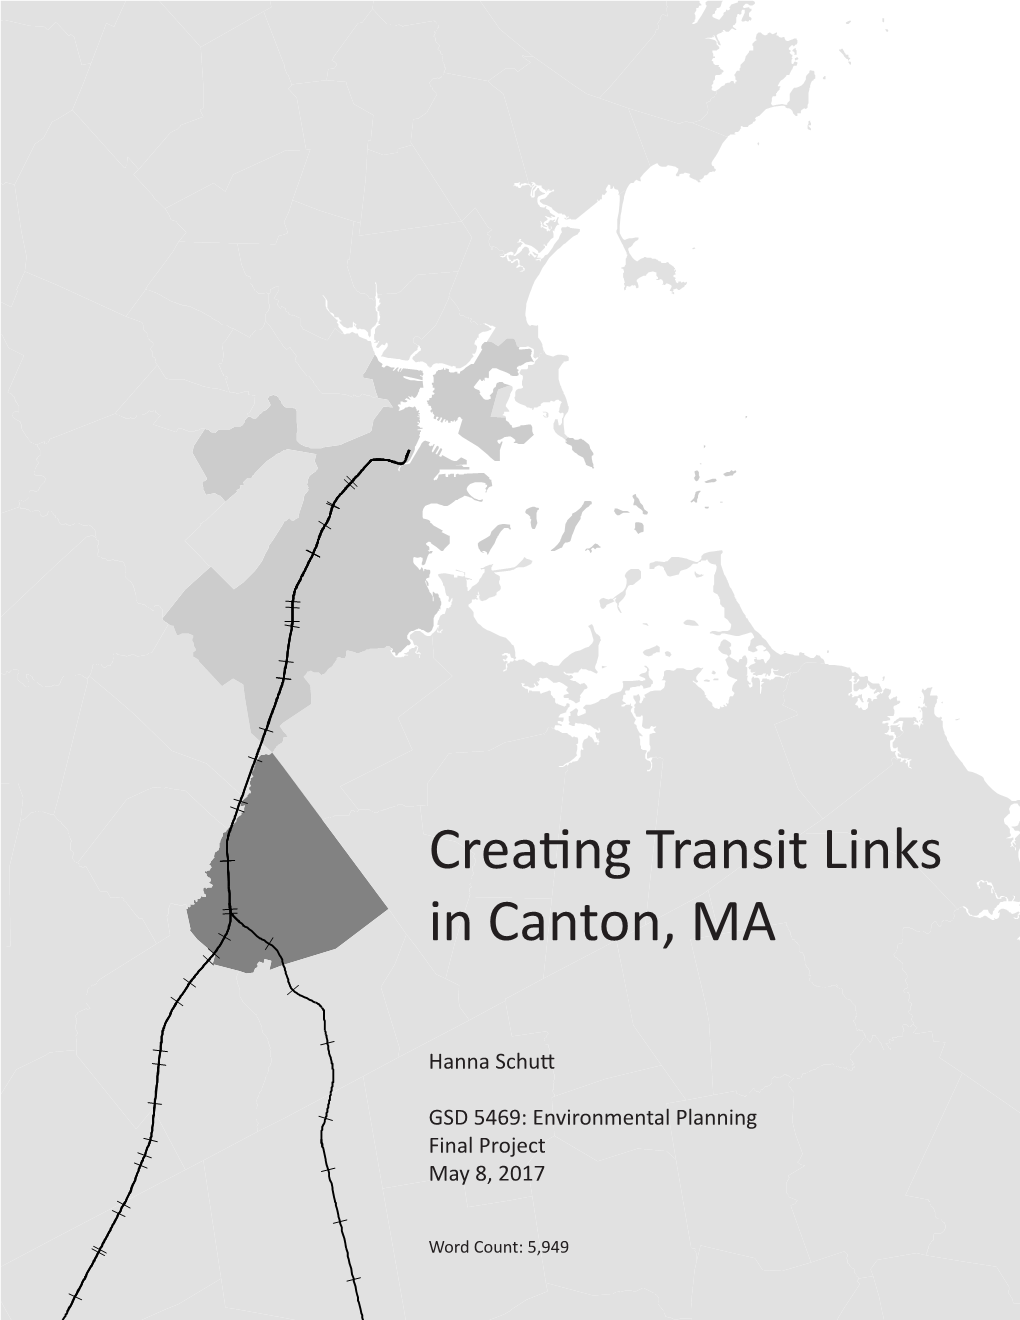 Creating Transit Links in Canton, MA